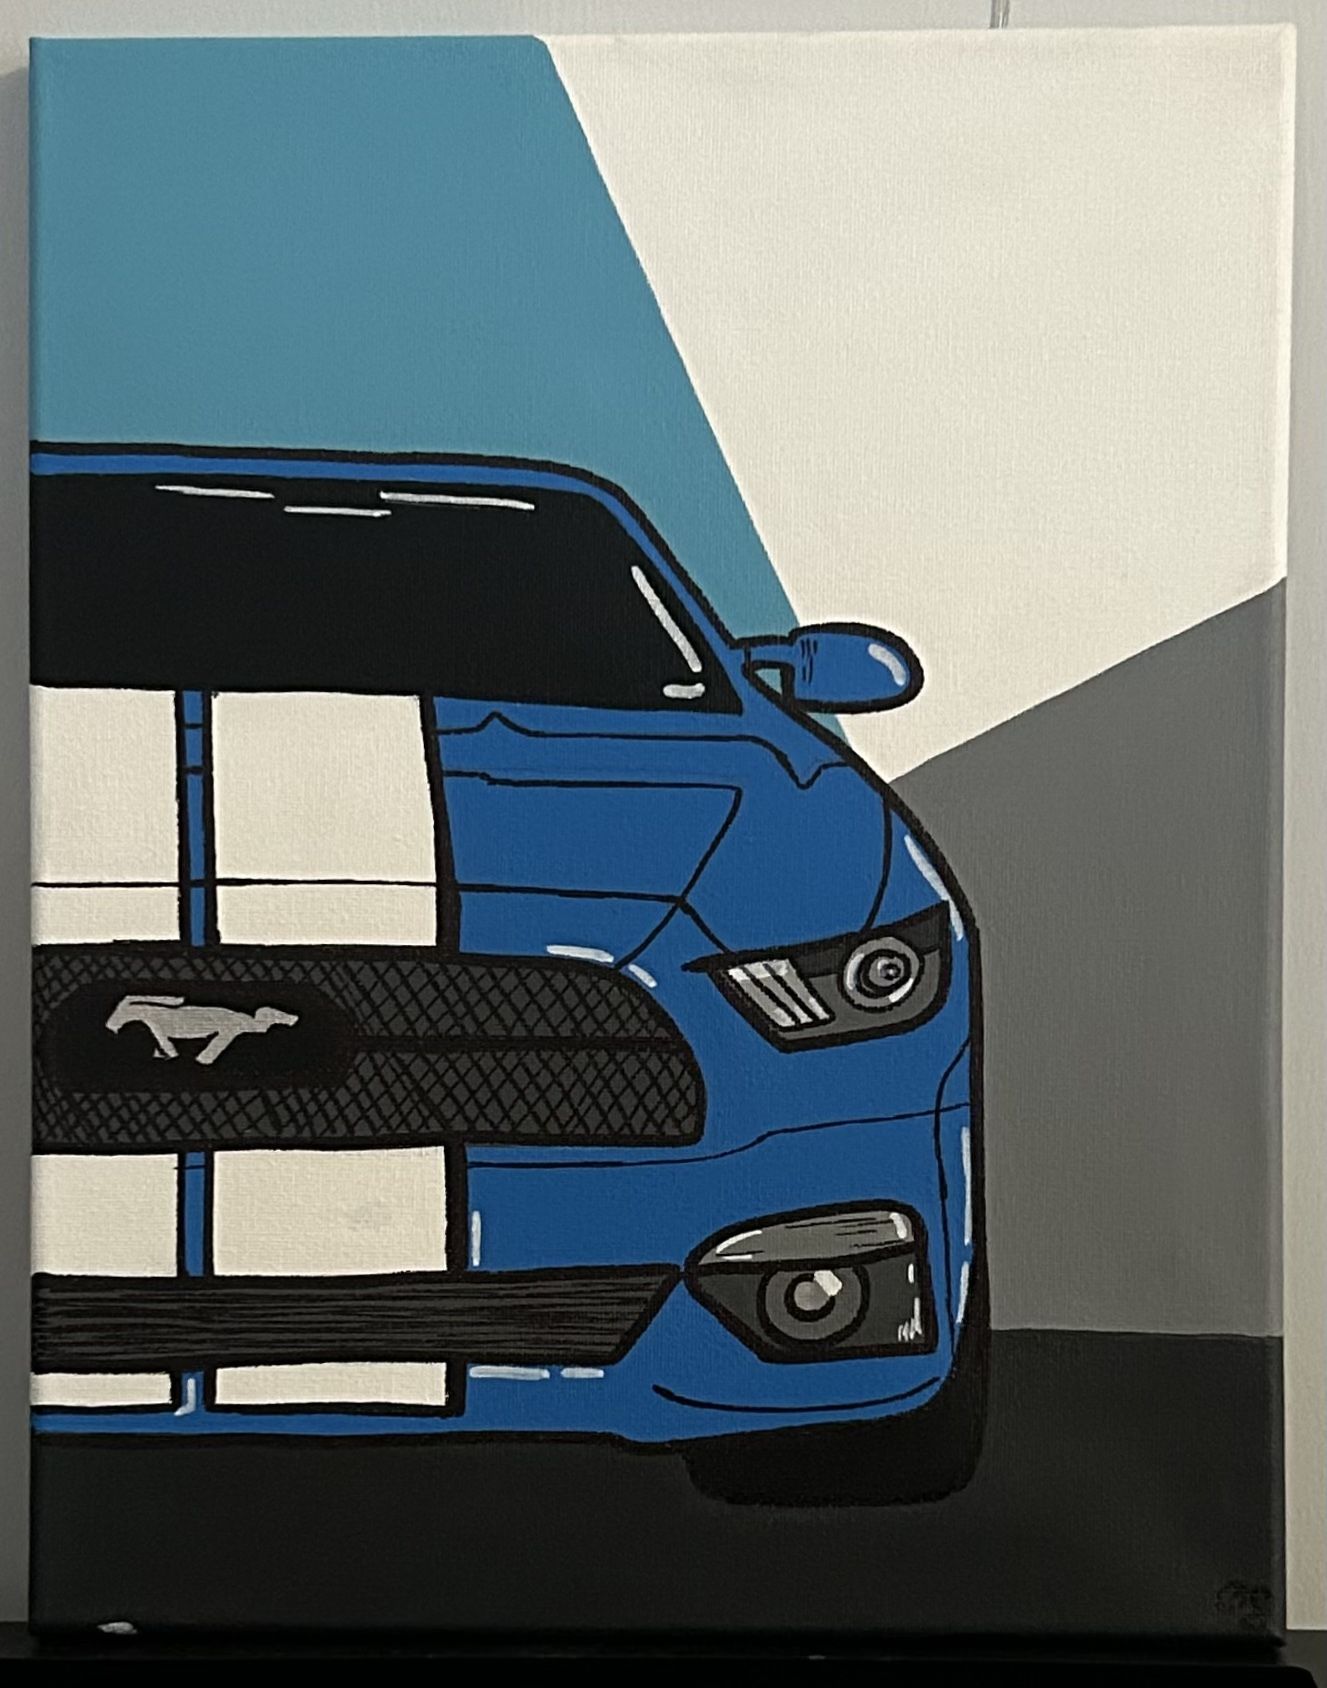 Blue Mustang with White Stripes Painting